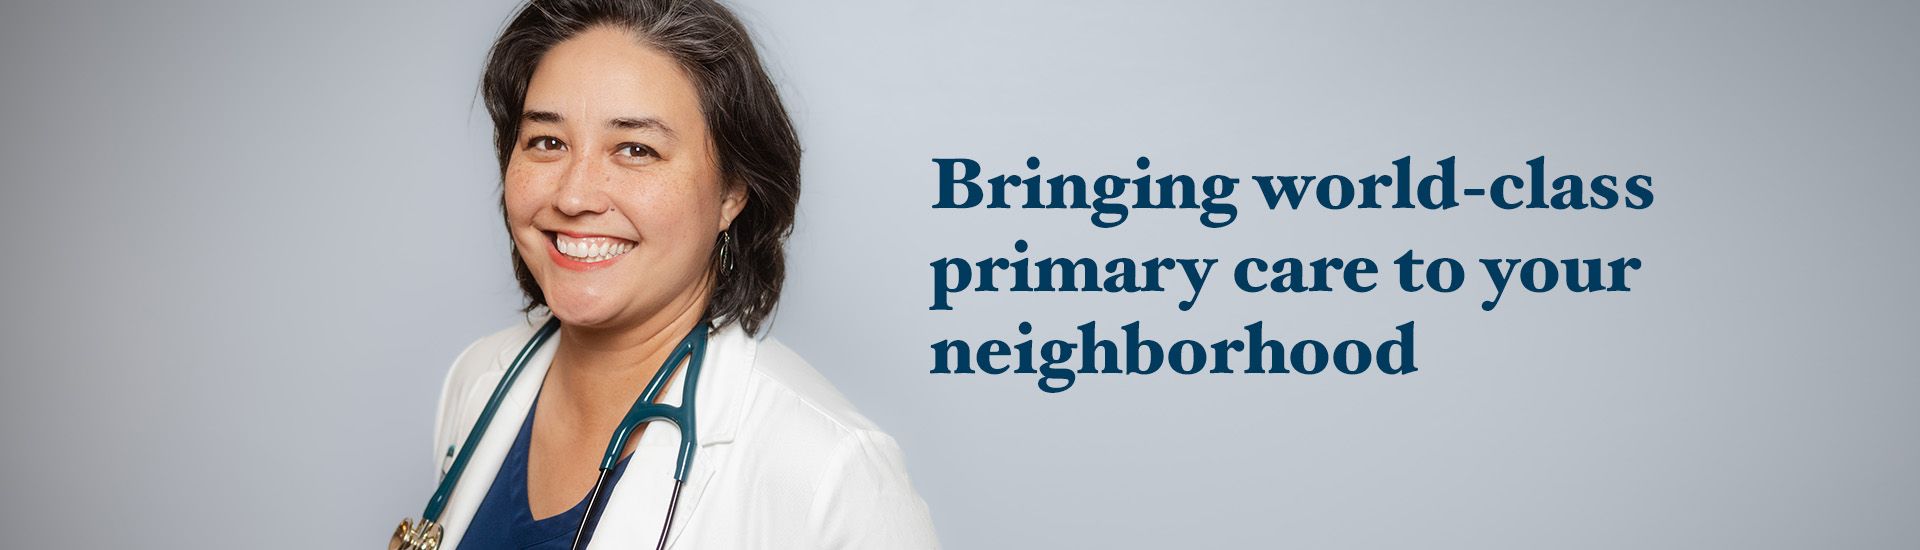 Bringing World-Class Primary care to your neighborhood